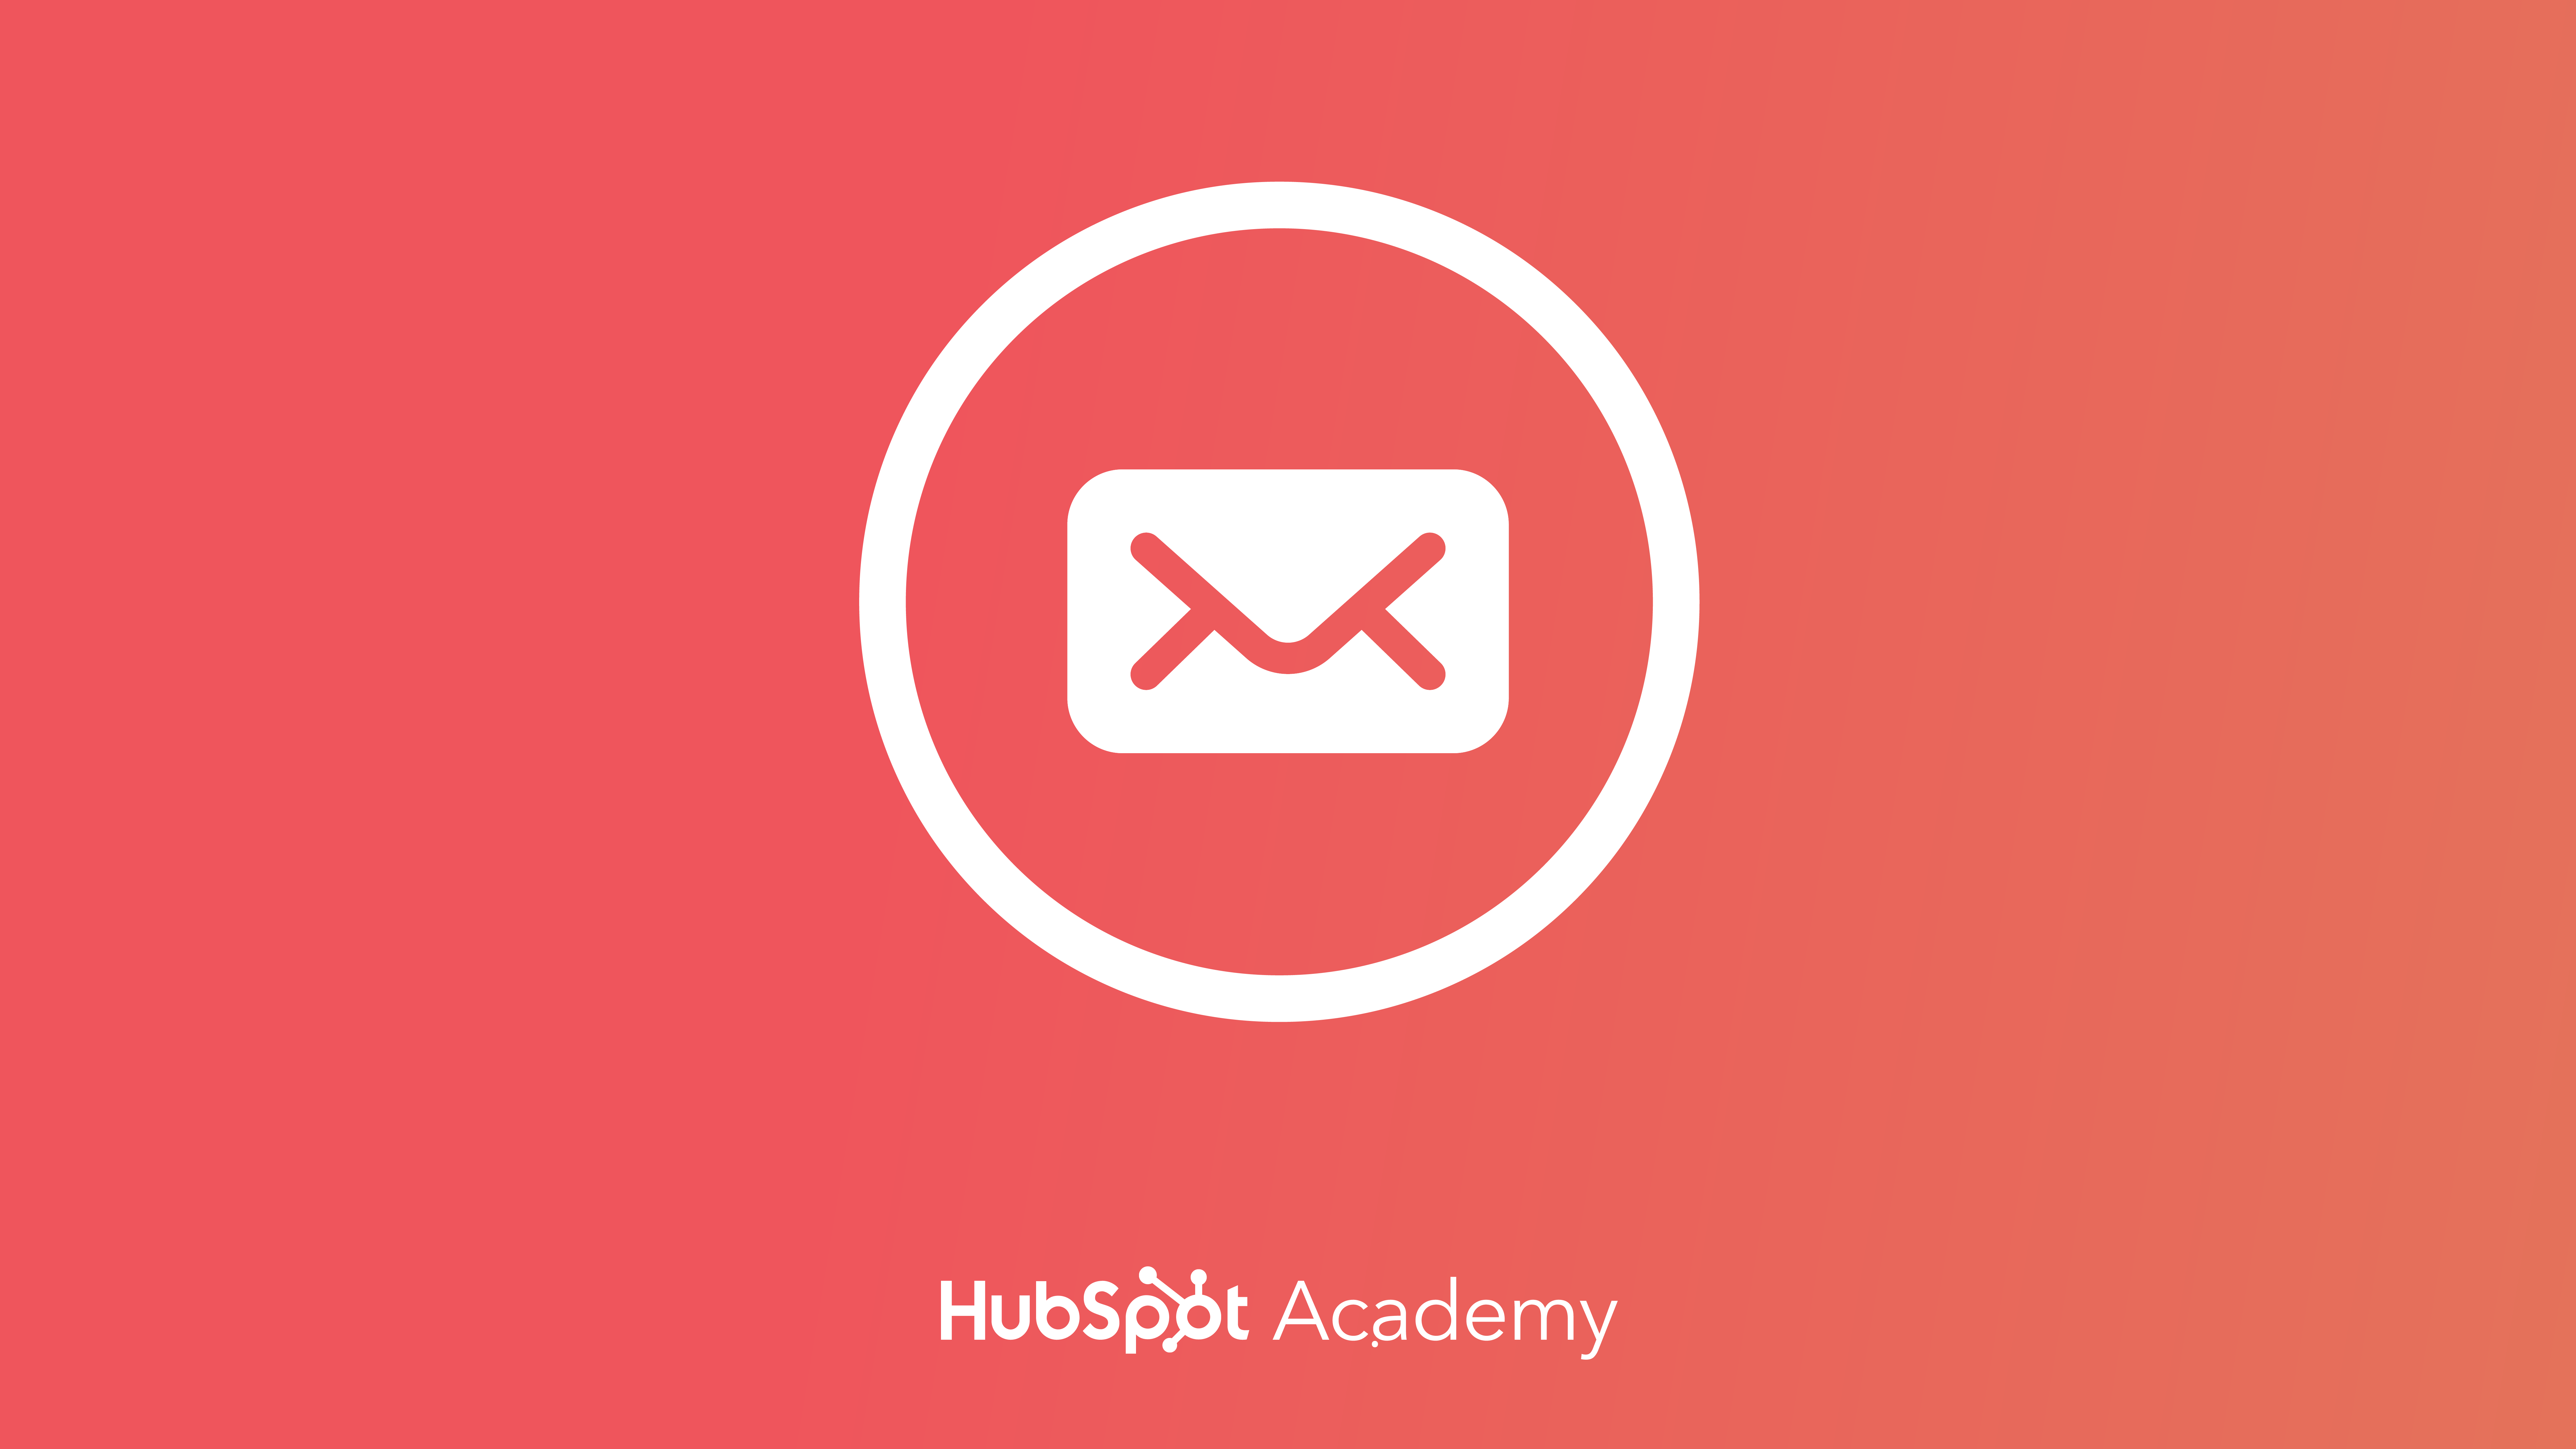 Email Marketing Certification course by HubSpot Academy